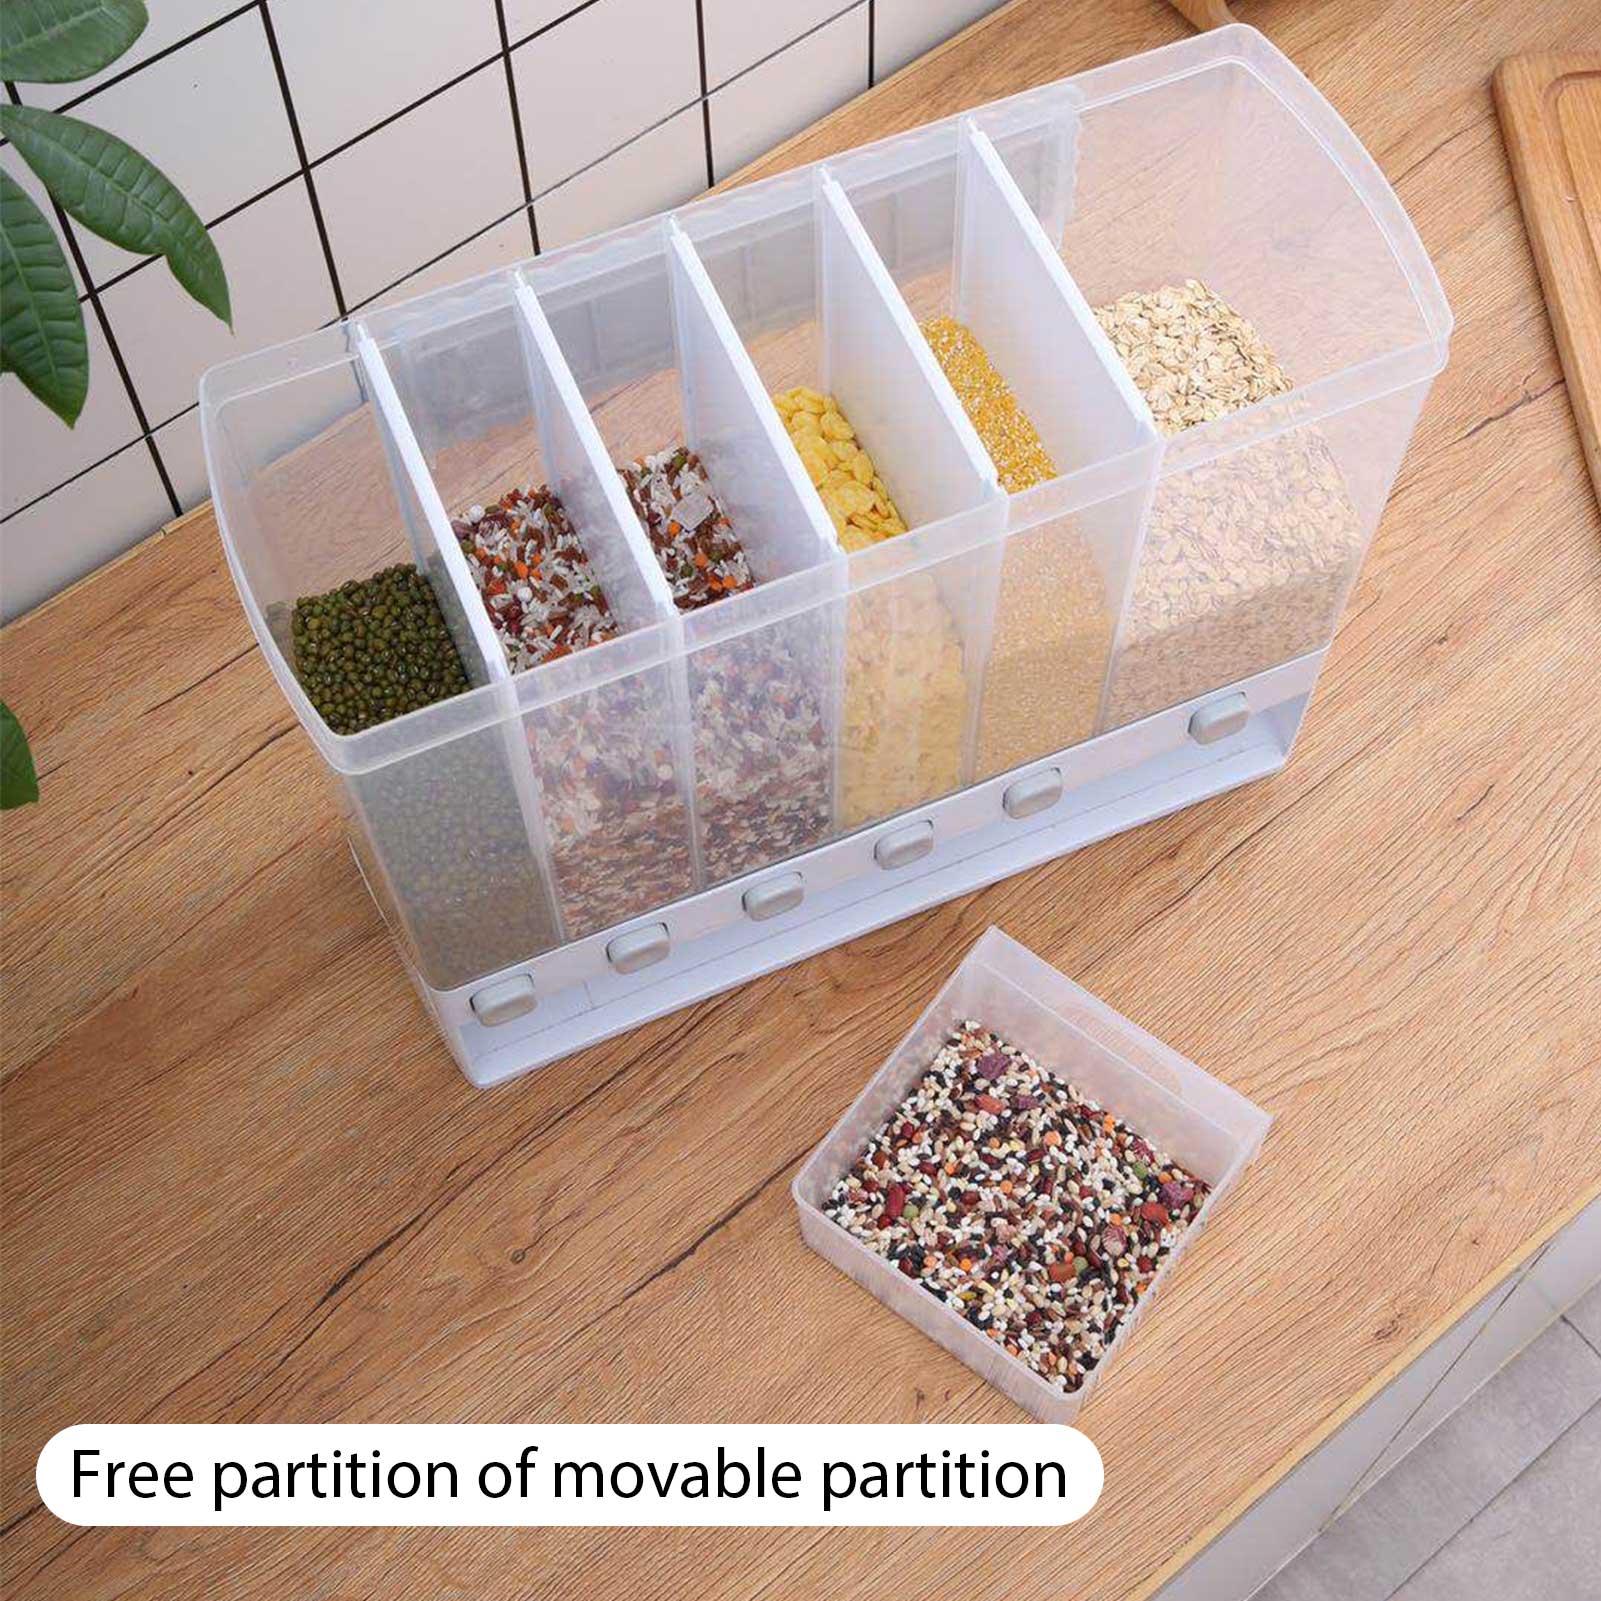 MULTIPLE DISPENSER FOR CEREALS, GRAIN AND PULSES । WALL MOUNTED FOOD DISPENSER । KITCHEN ORGANIZER FOR BEANS